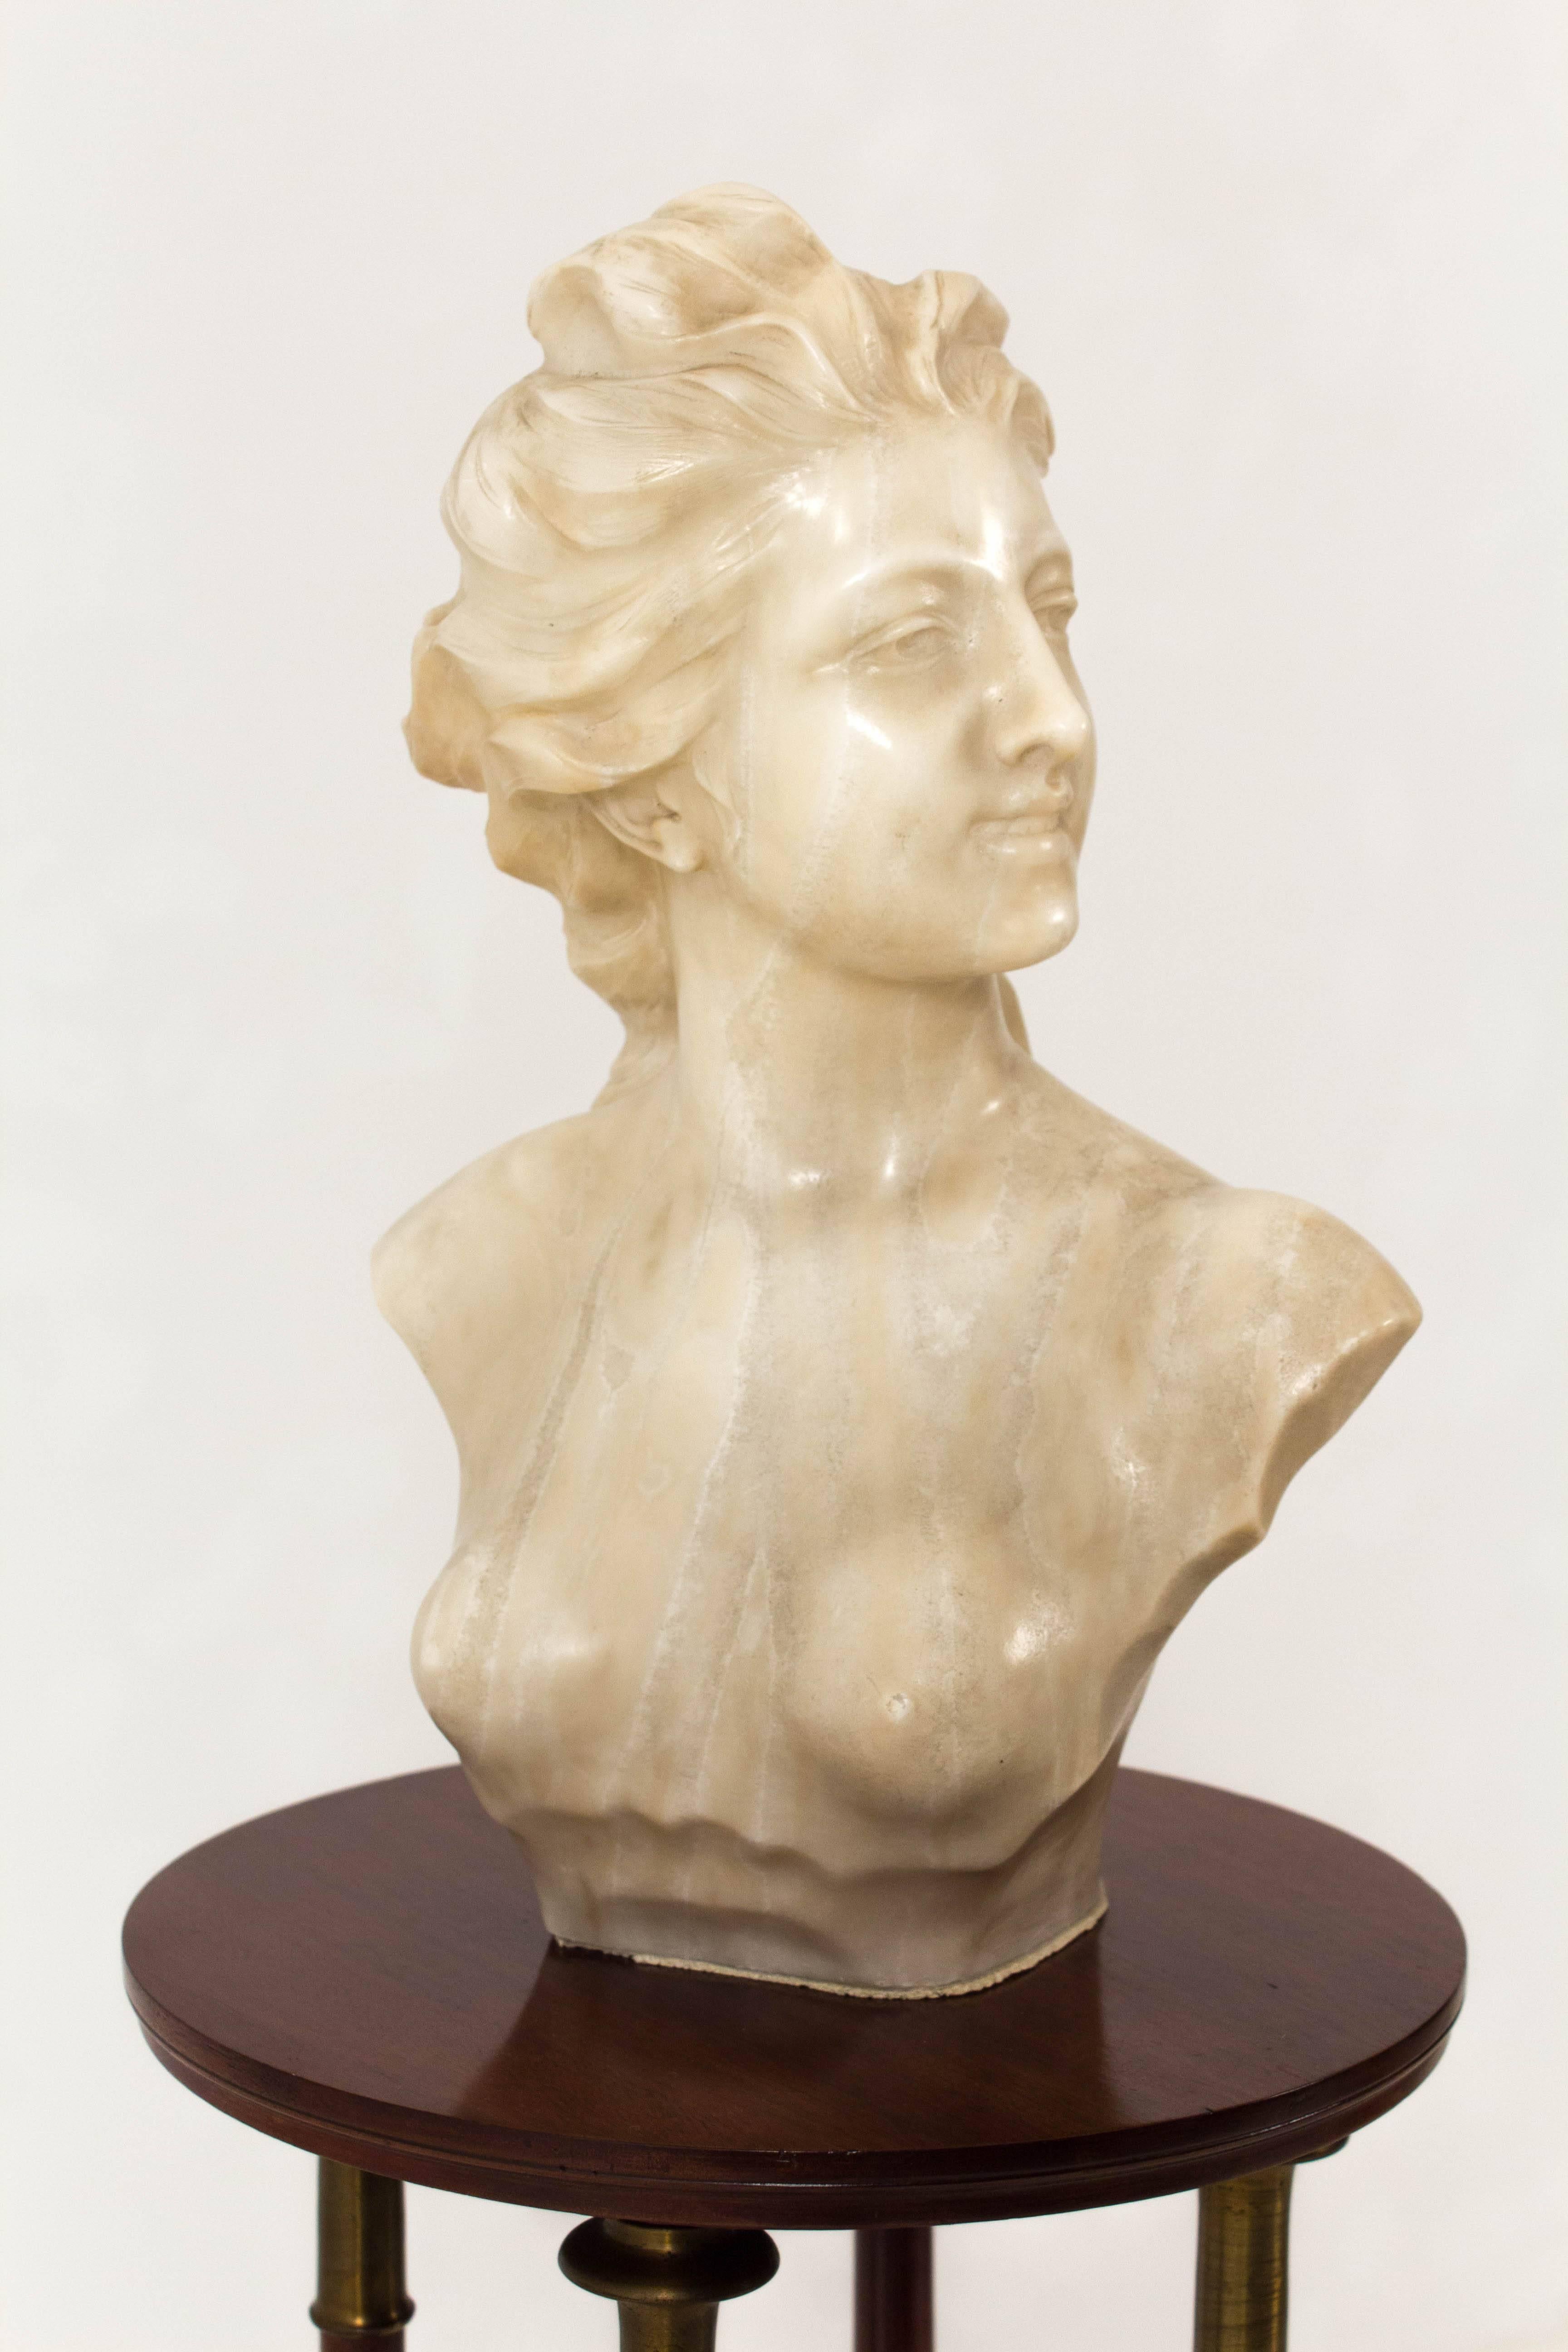 Stunning alabaster Art Nouveau bust of young lady by Jef Lambeaux.
Jef Lambeaux (Antwerp 1852 - Brussels 1908) was a famous and very talented
Belgian sculptor born in Antwerp.
He studied at the Antwerp Academy of Fine Arts.
Bust is in good